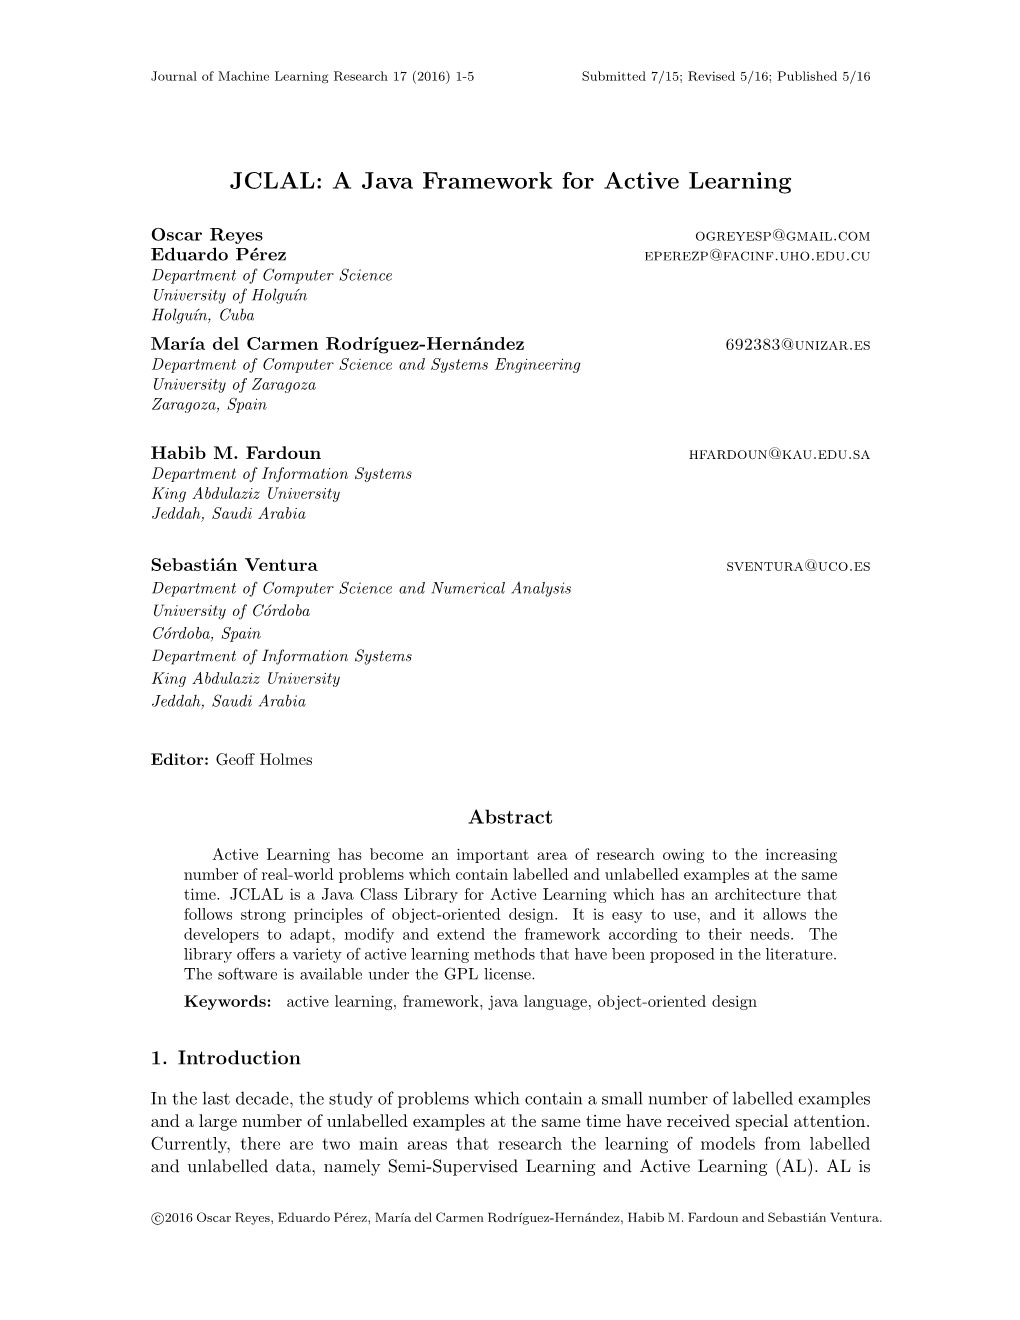 JCLAL: a Java Framework for Active Learning